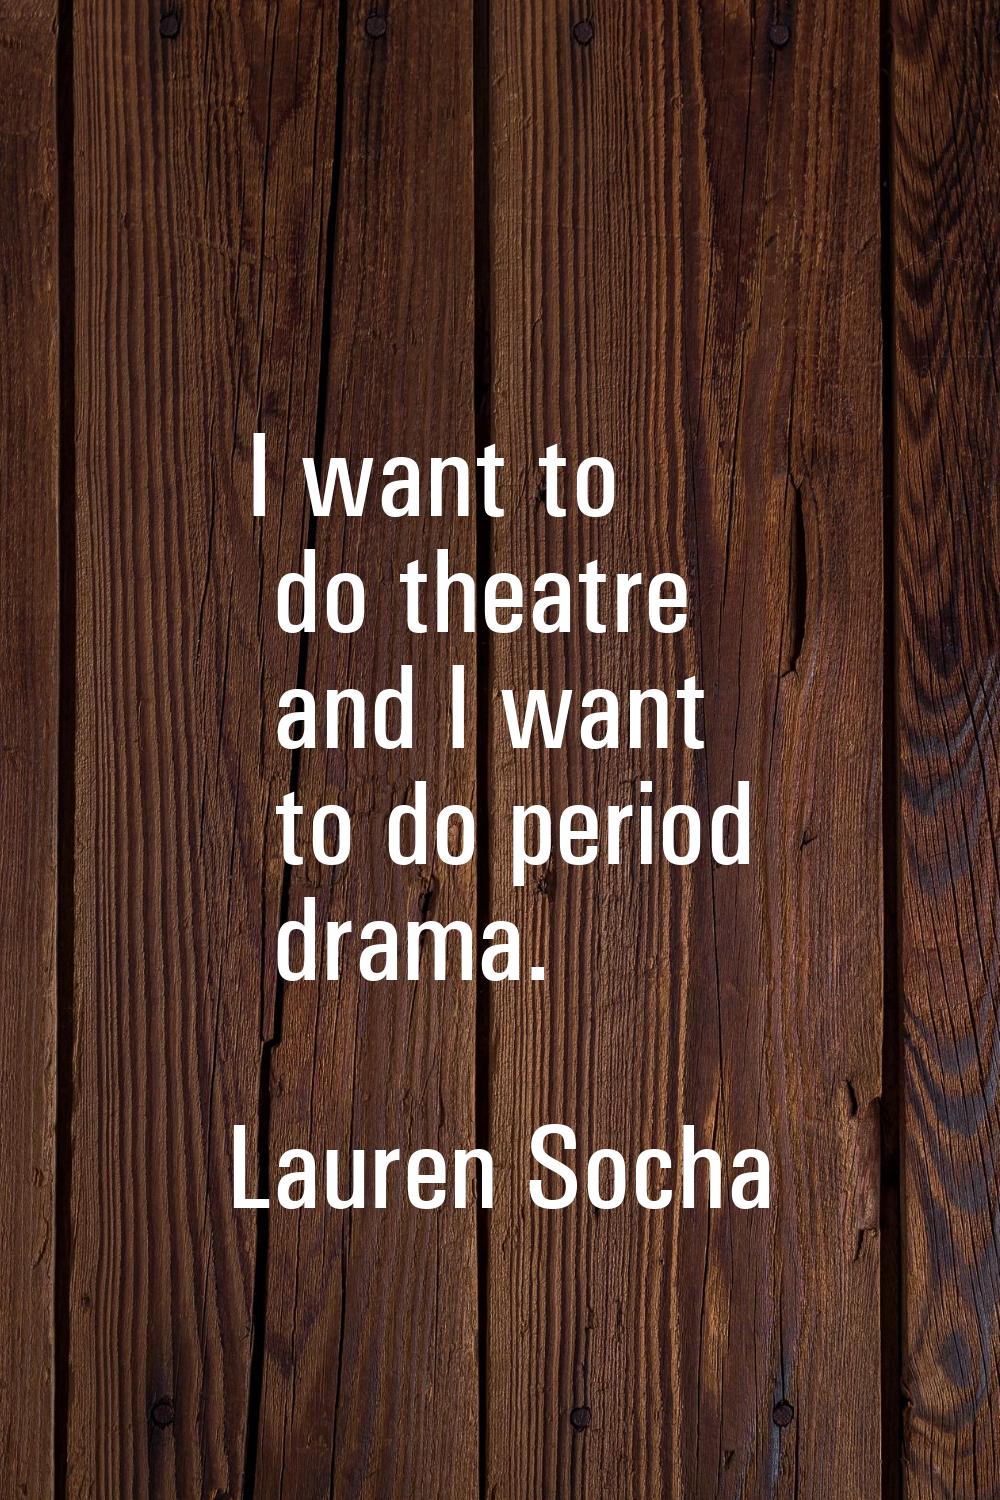 I want to do theatre and I want to do period drama.